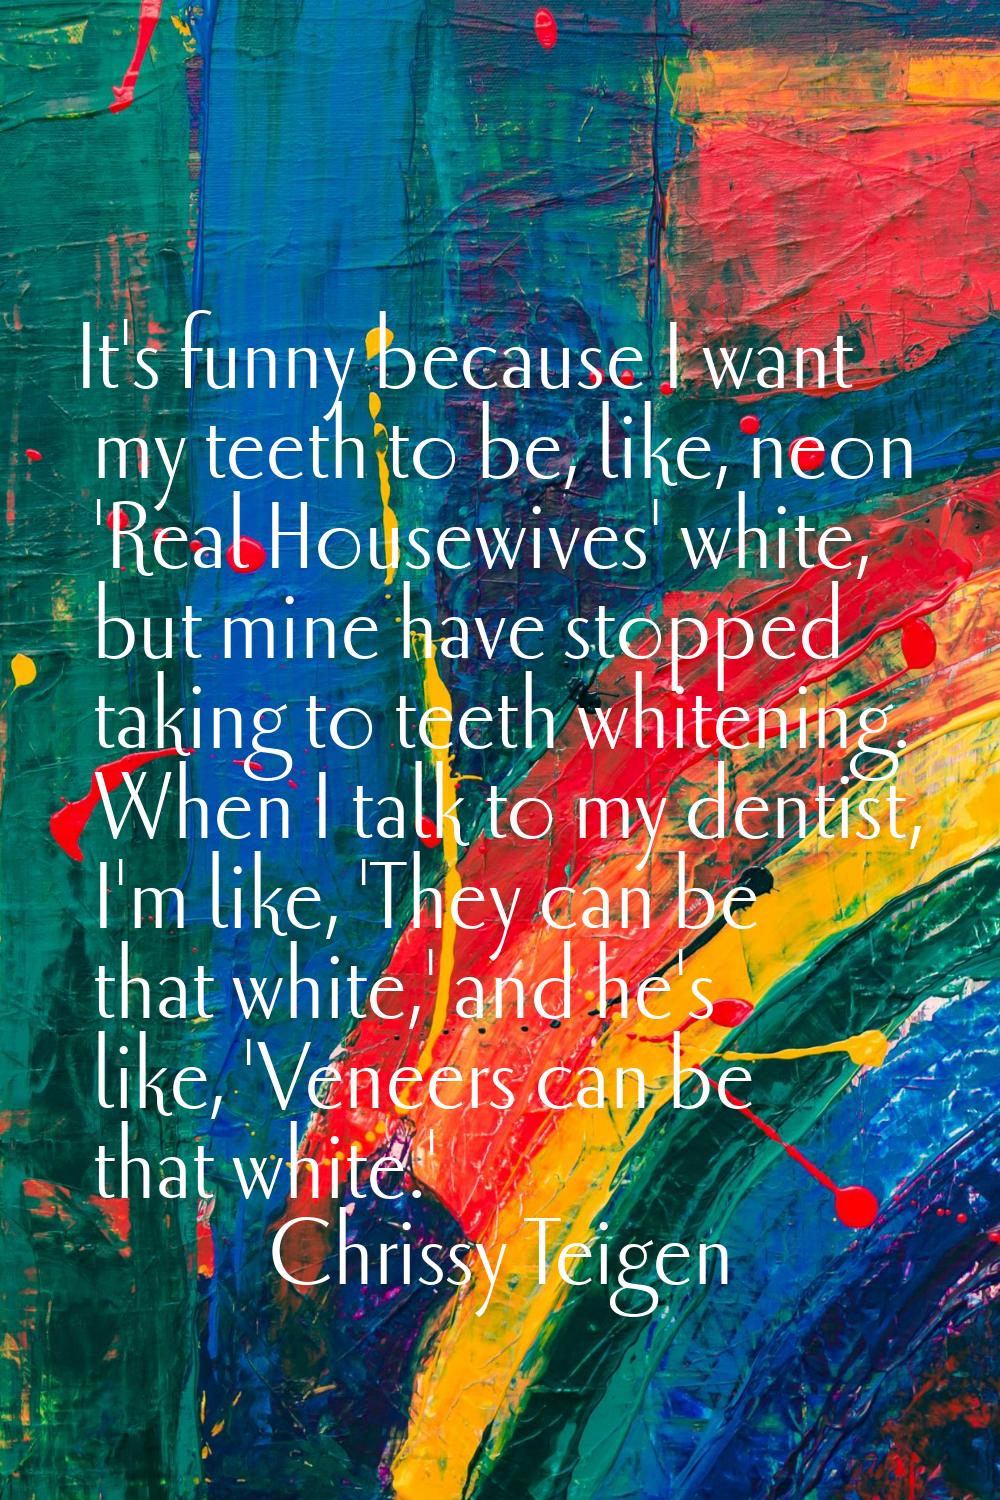 It's funny because I want my teeth to be, like, neon 'Real Housewives' white, but mine have stopped